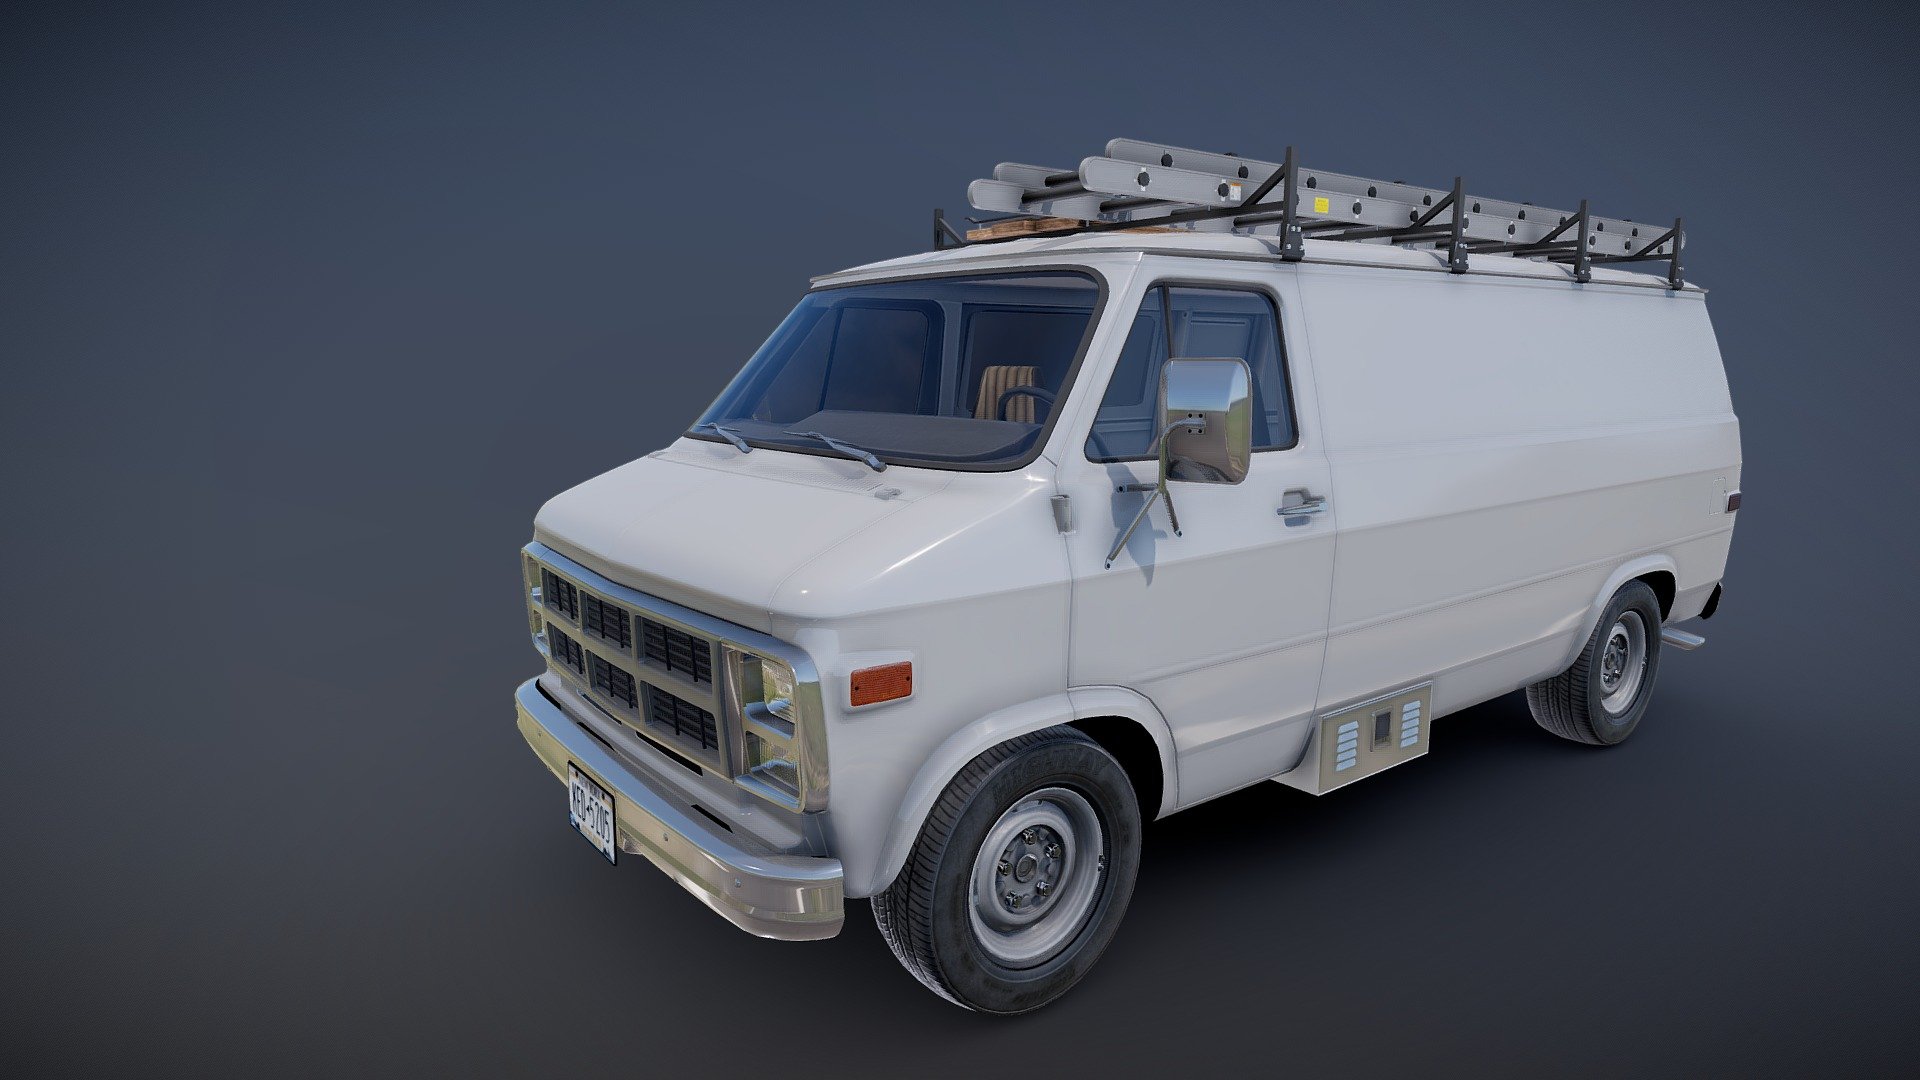 80s utility van game ready model.

High accuracy exterior model.

Lowpoly interior

High detailed rims and tires, with PBR maps(Base_Color/Metallic/Normal/Roughness.png2048x2048 )

Model ready for real-time apps, games, virtual reality and augmented reality.

Asset looks accuracy and realistic and become a good part of your project 3d model